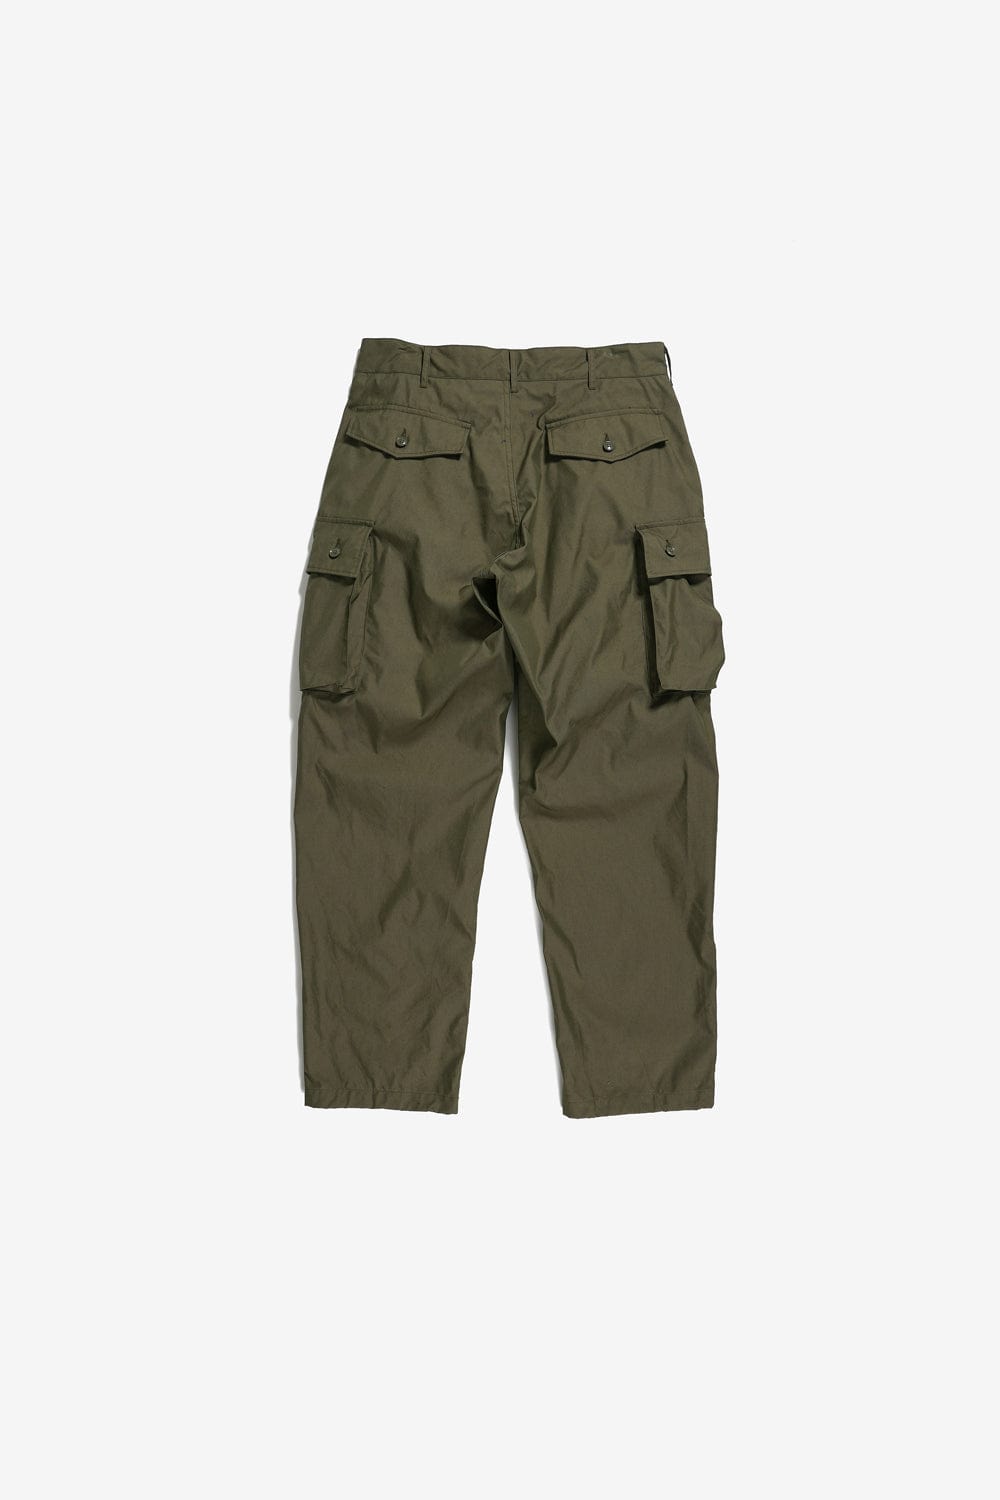 Engineered Garments FA Pant (Olive CP Weather Poplin) - Commonwealth